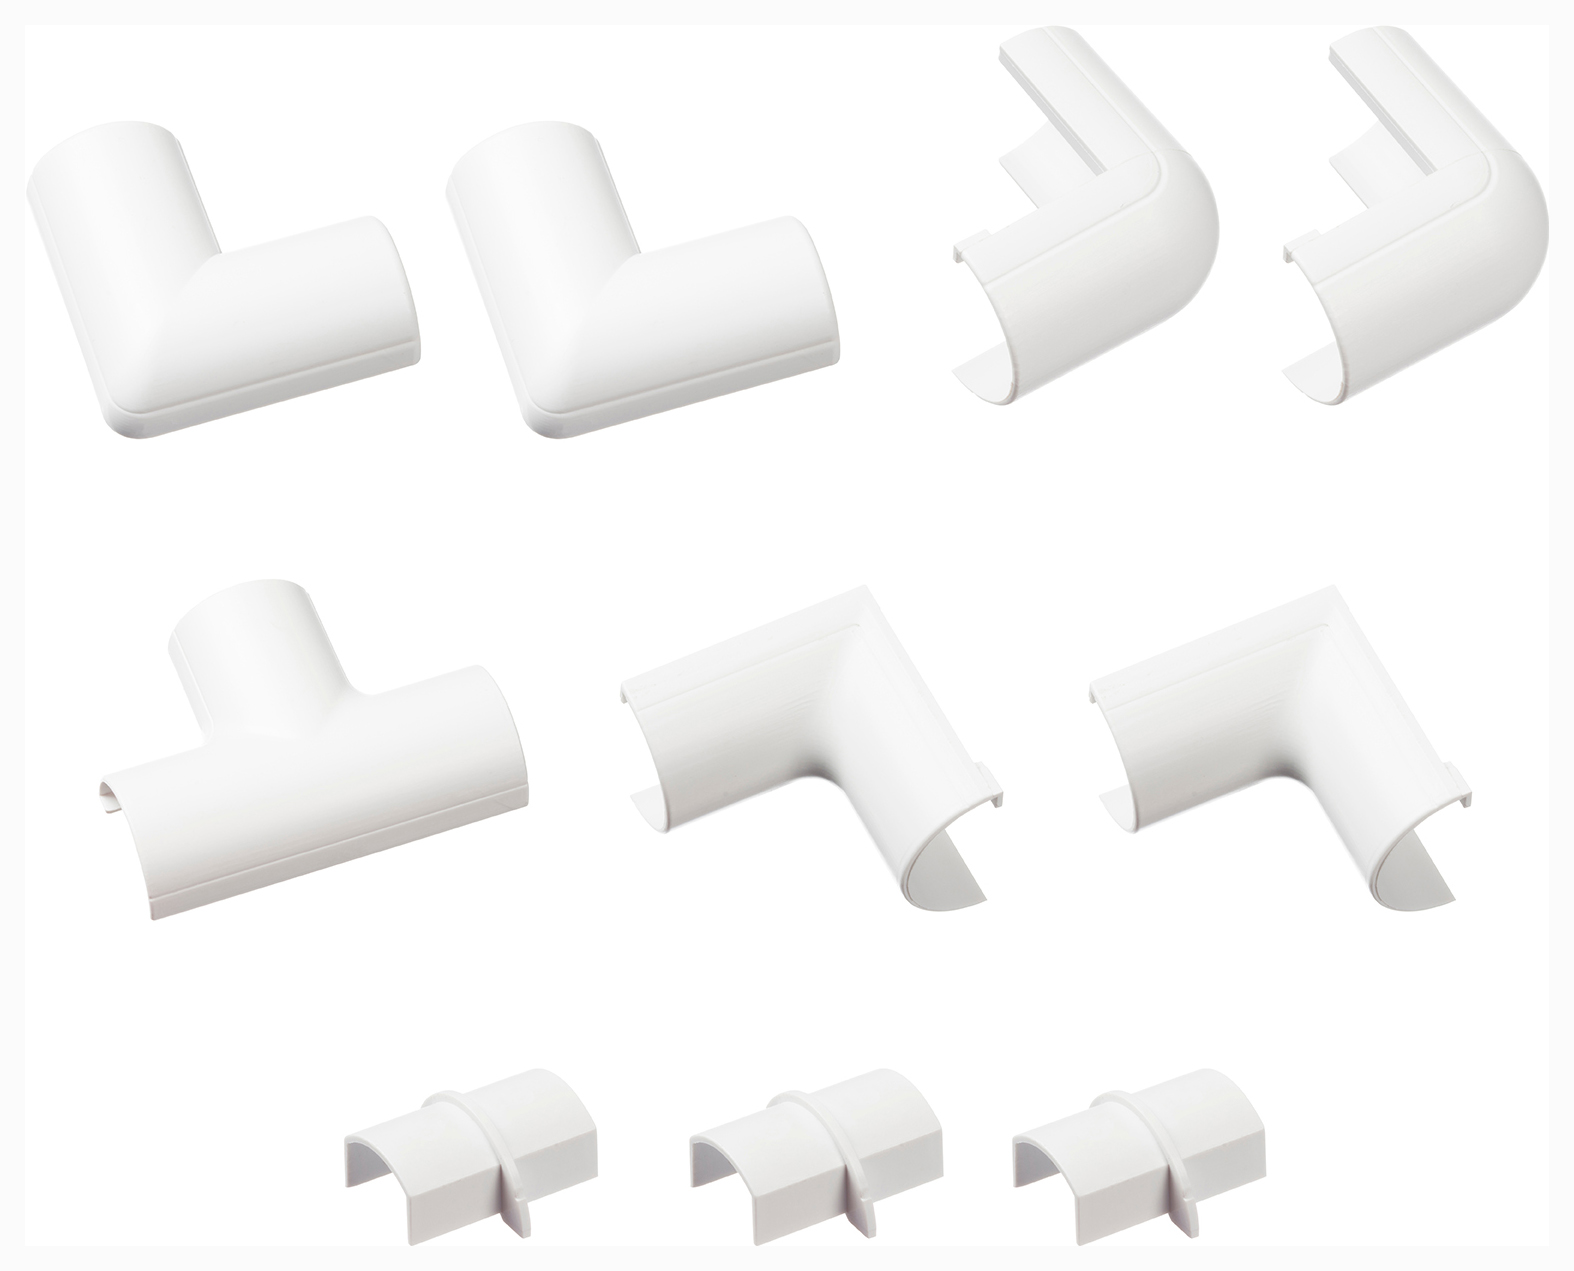 D-Line 20 x 10mm Trunking Accessory Multi-Pack - Pack of 10